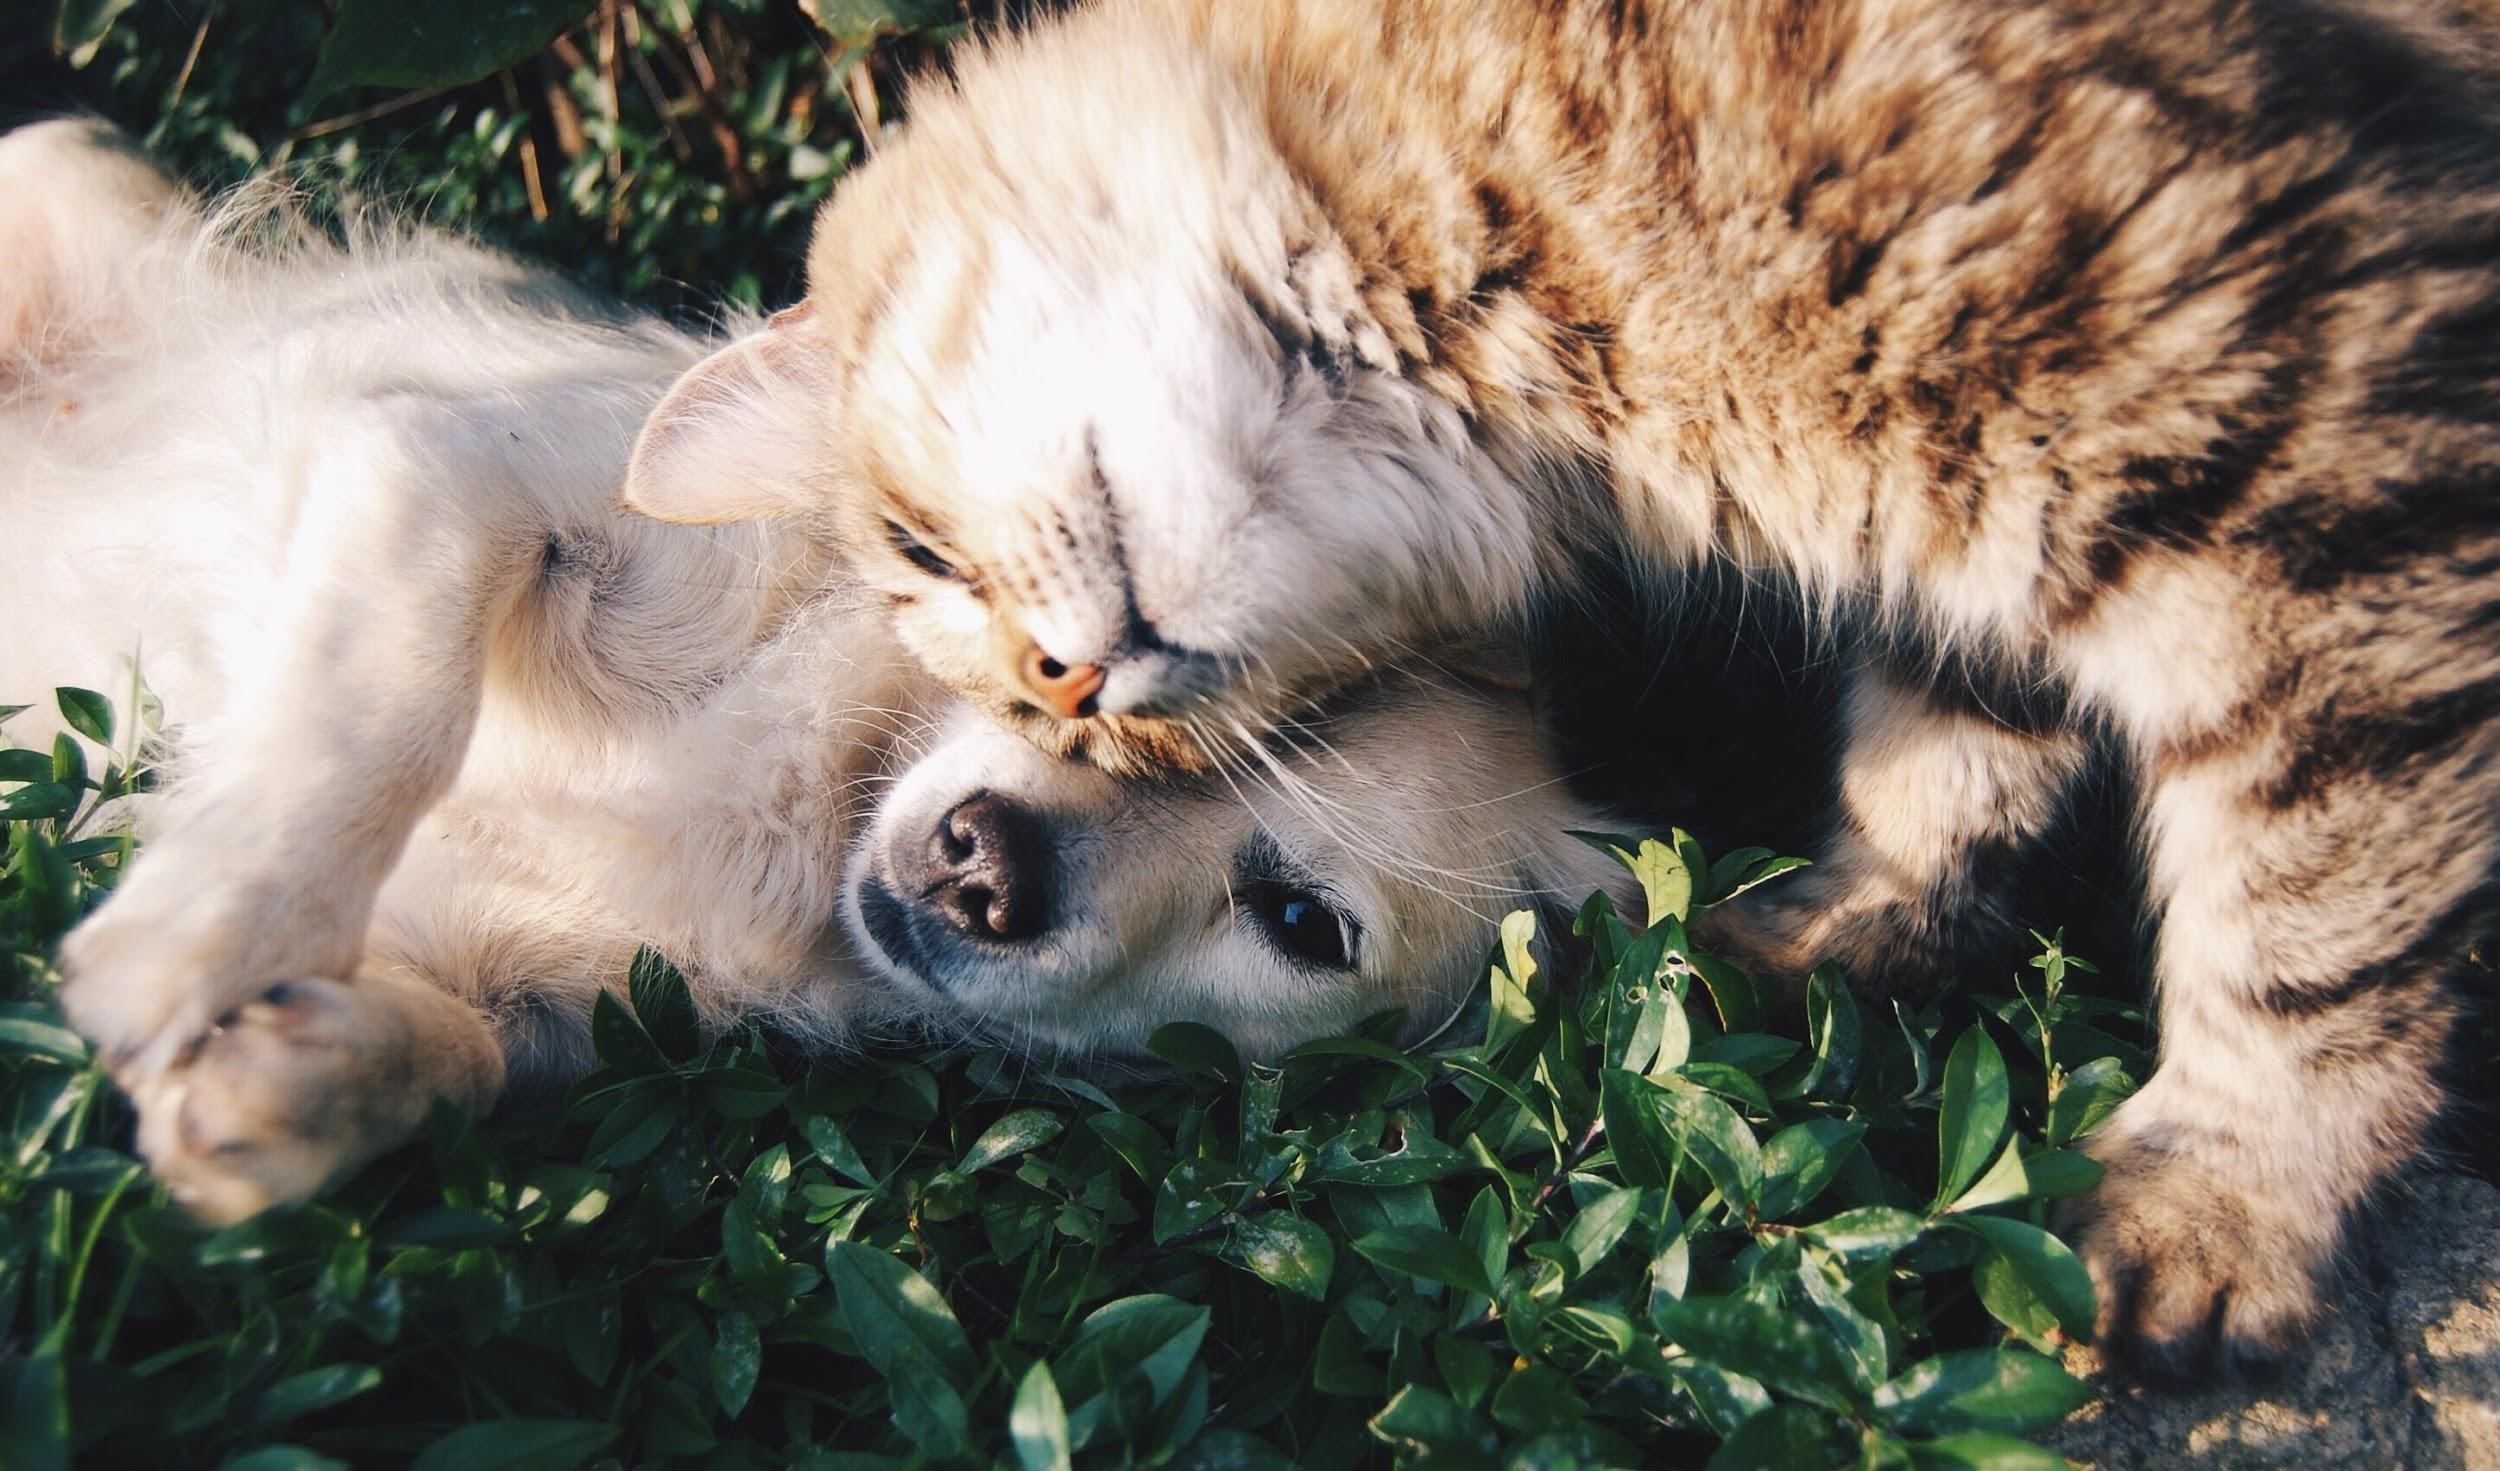 Cute cat and dog snuggling on grass